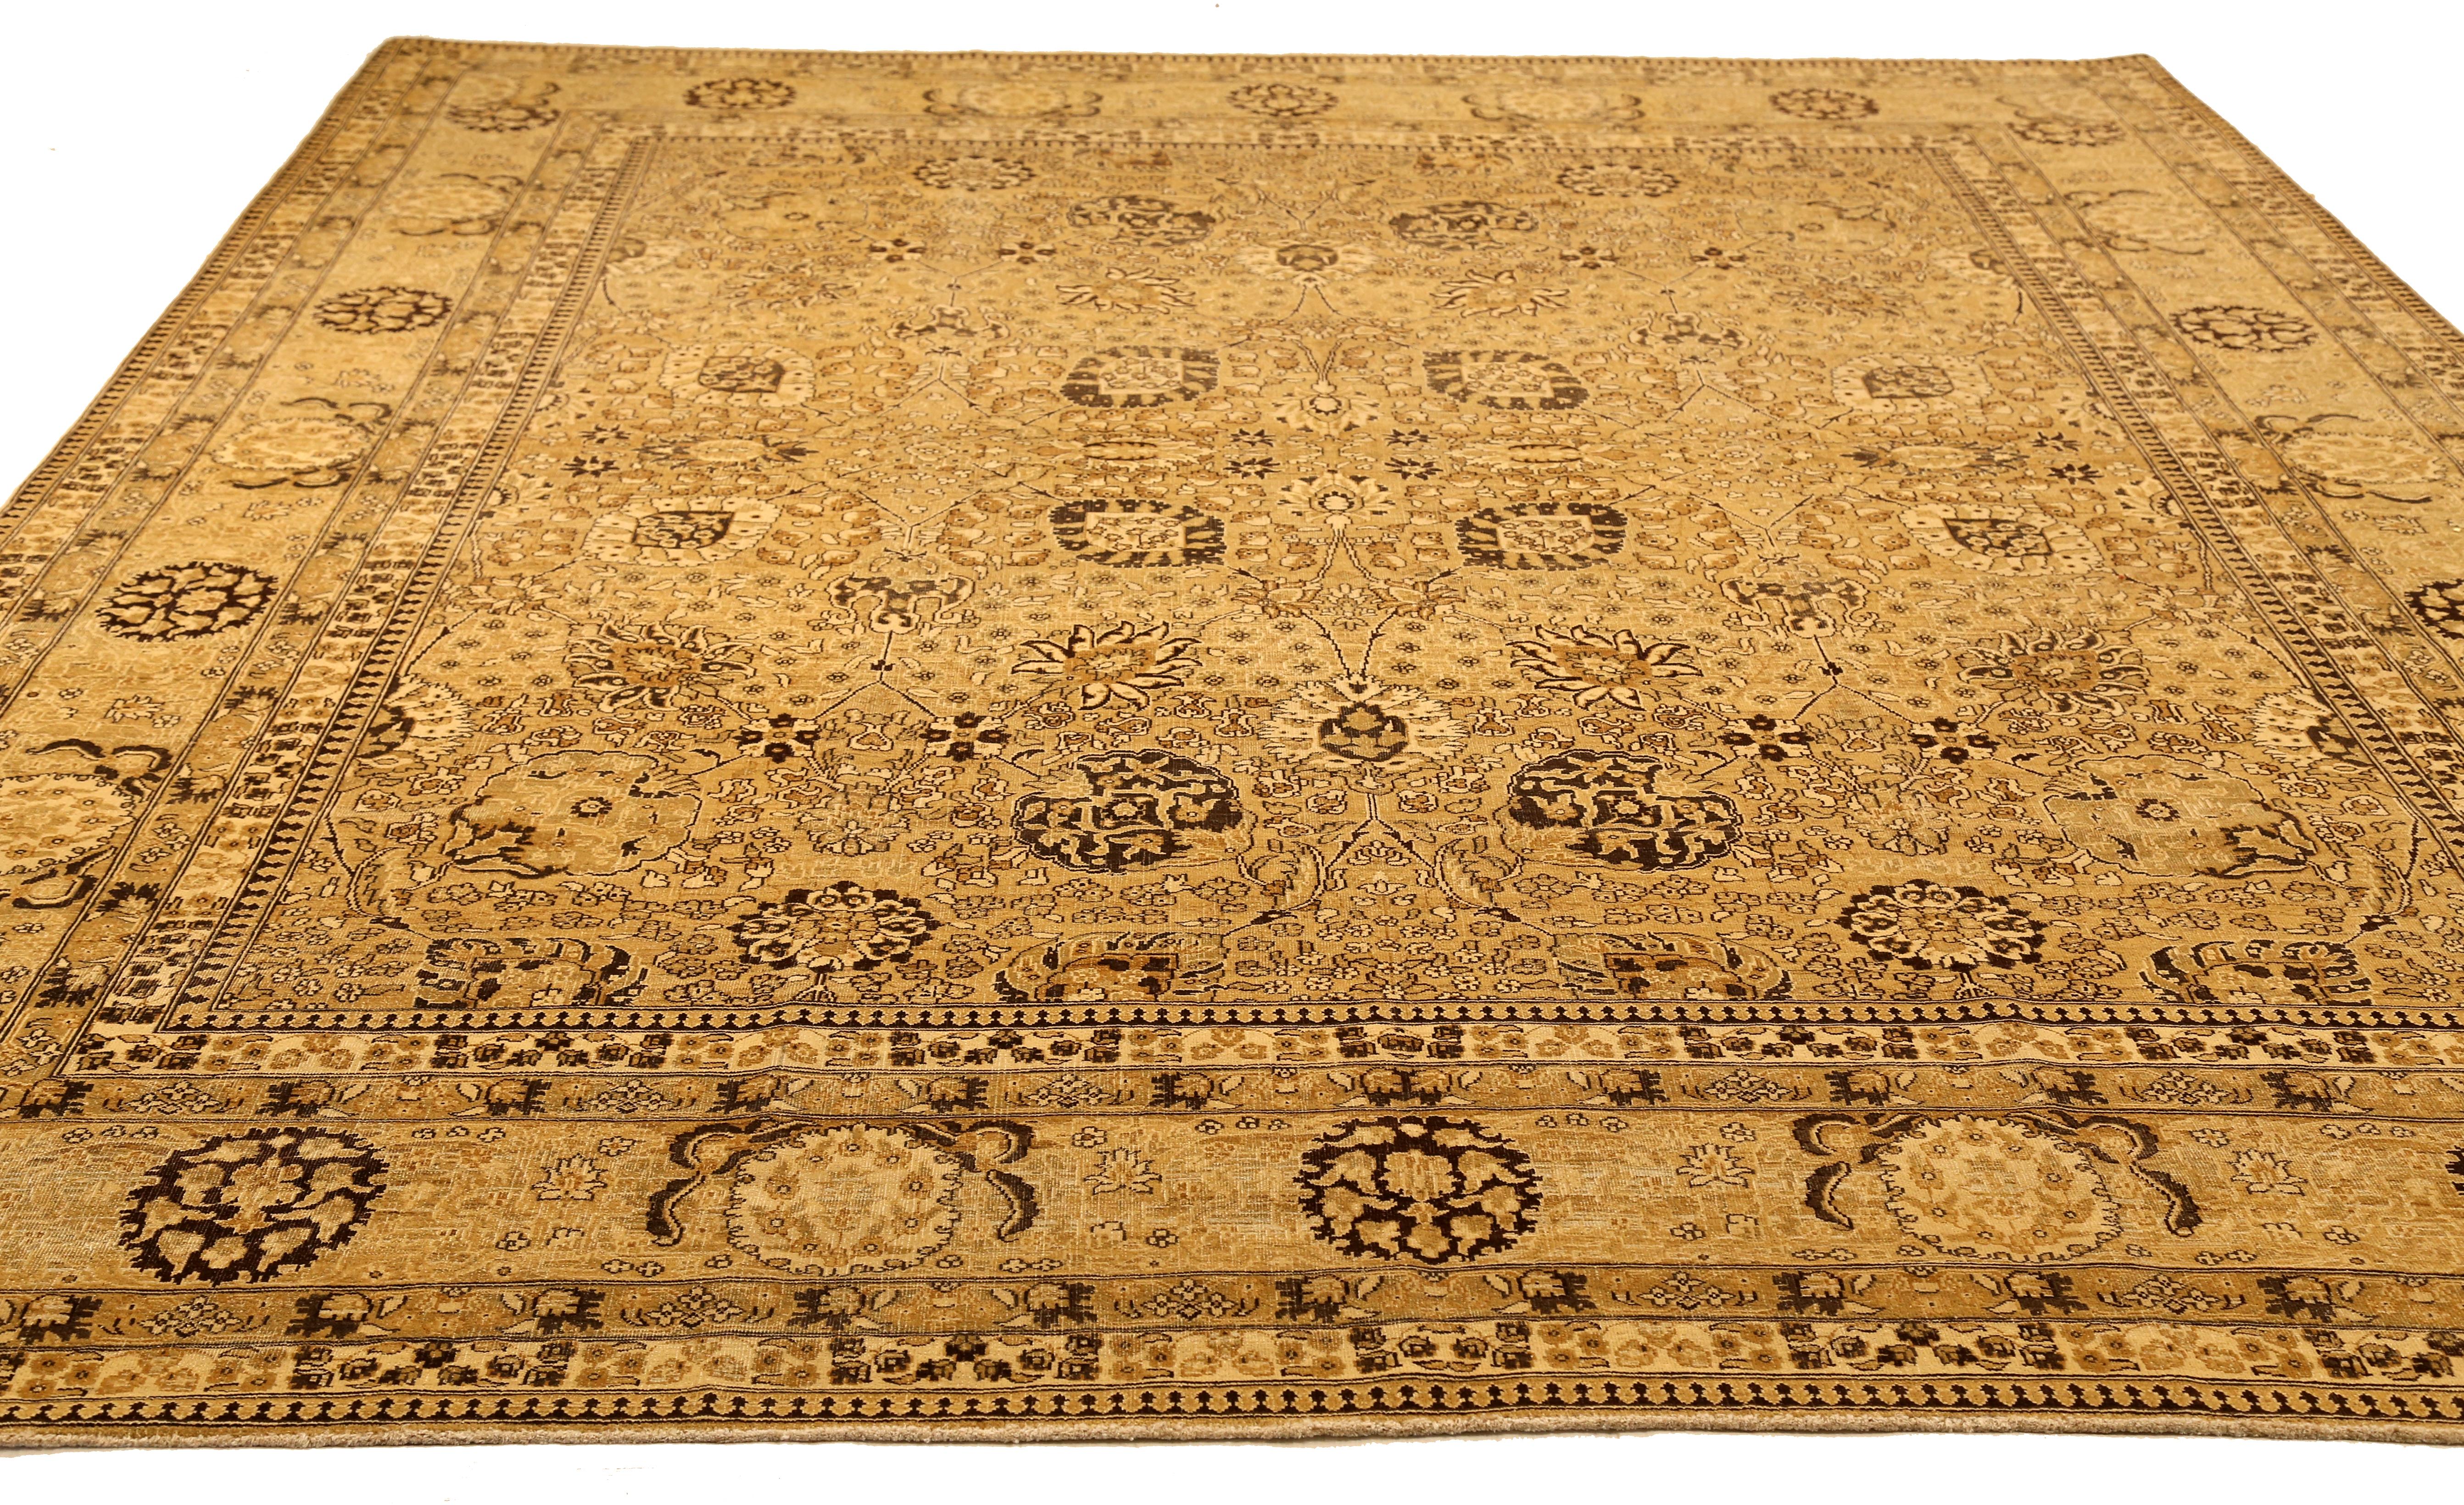 Antique mid-20th century hand-woven Turkish area rug made from fine wool and all-natural vegetable dyes that are safe for people and pets. It features traditional Tabriz weaving depicting intricate botanical and animal patterns often in bold colors.